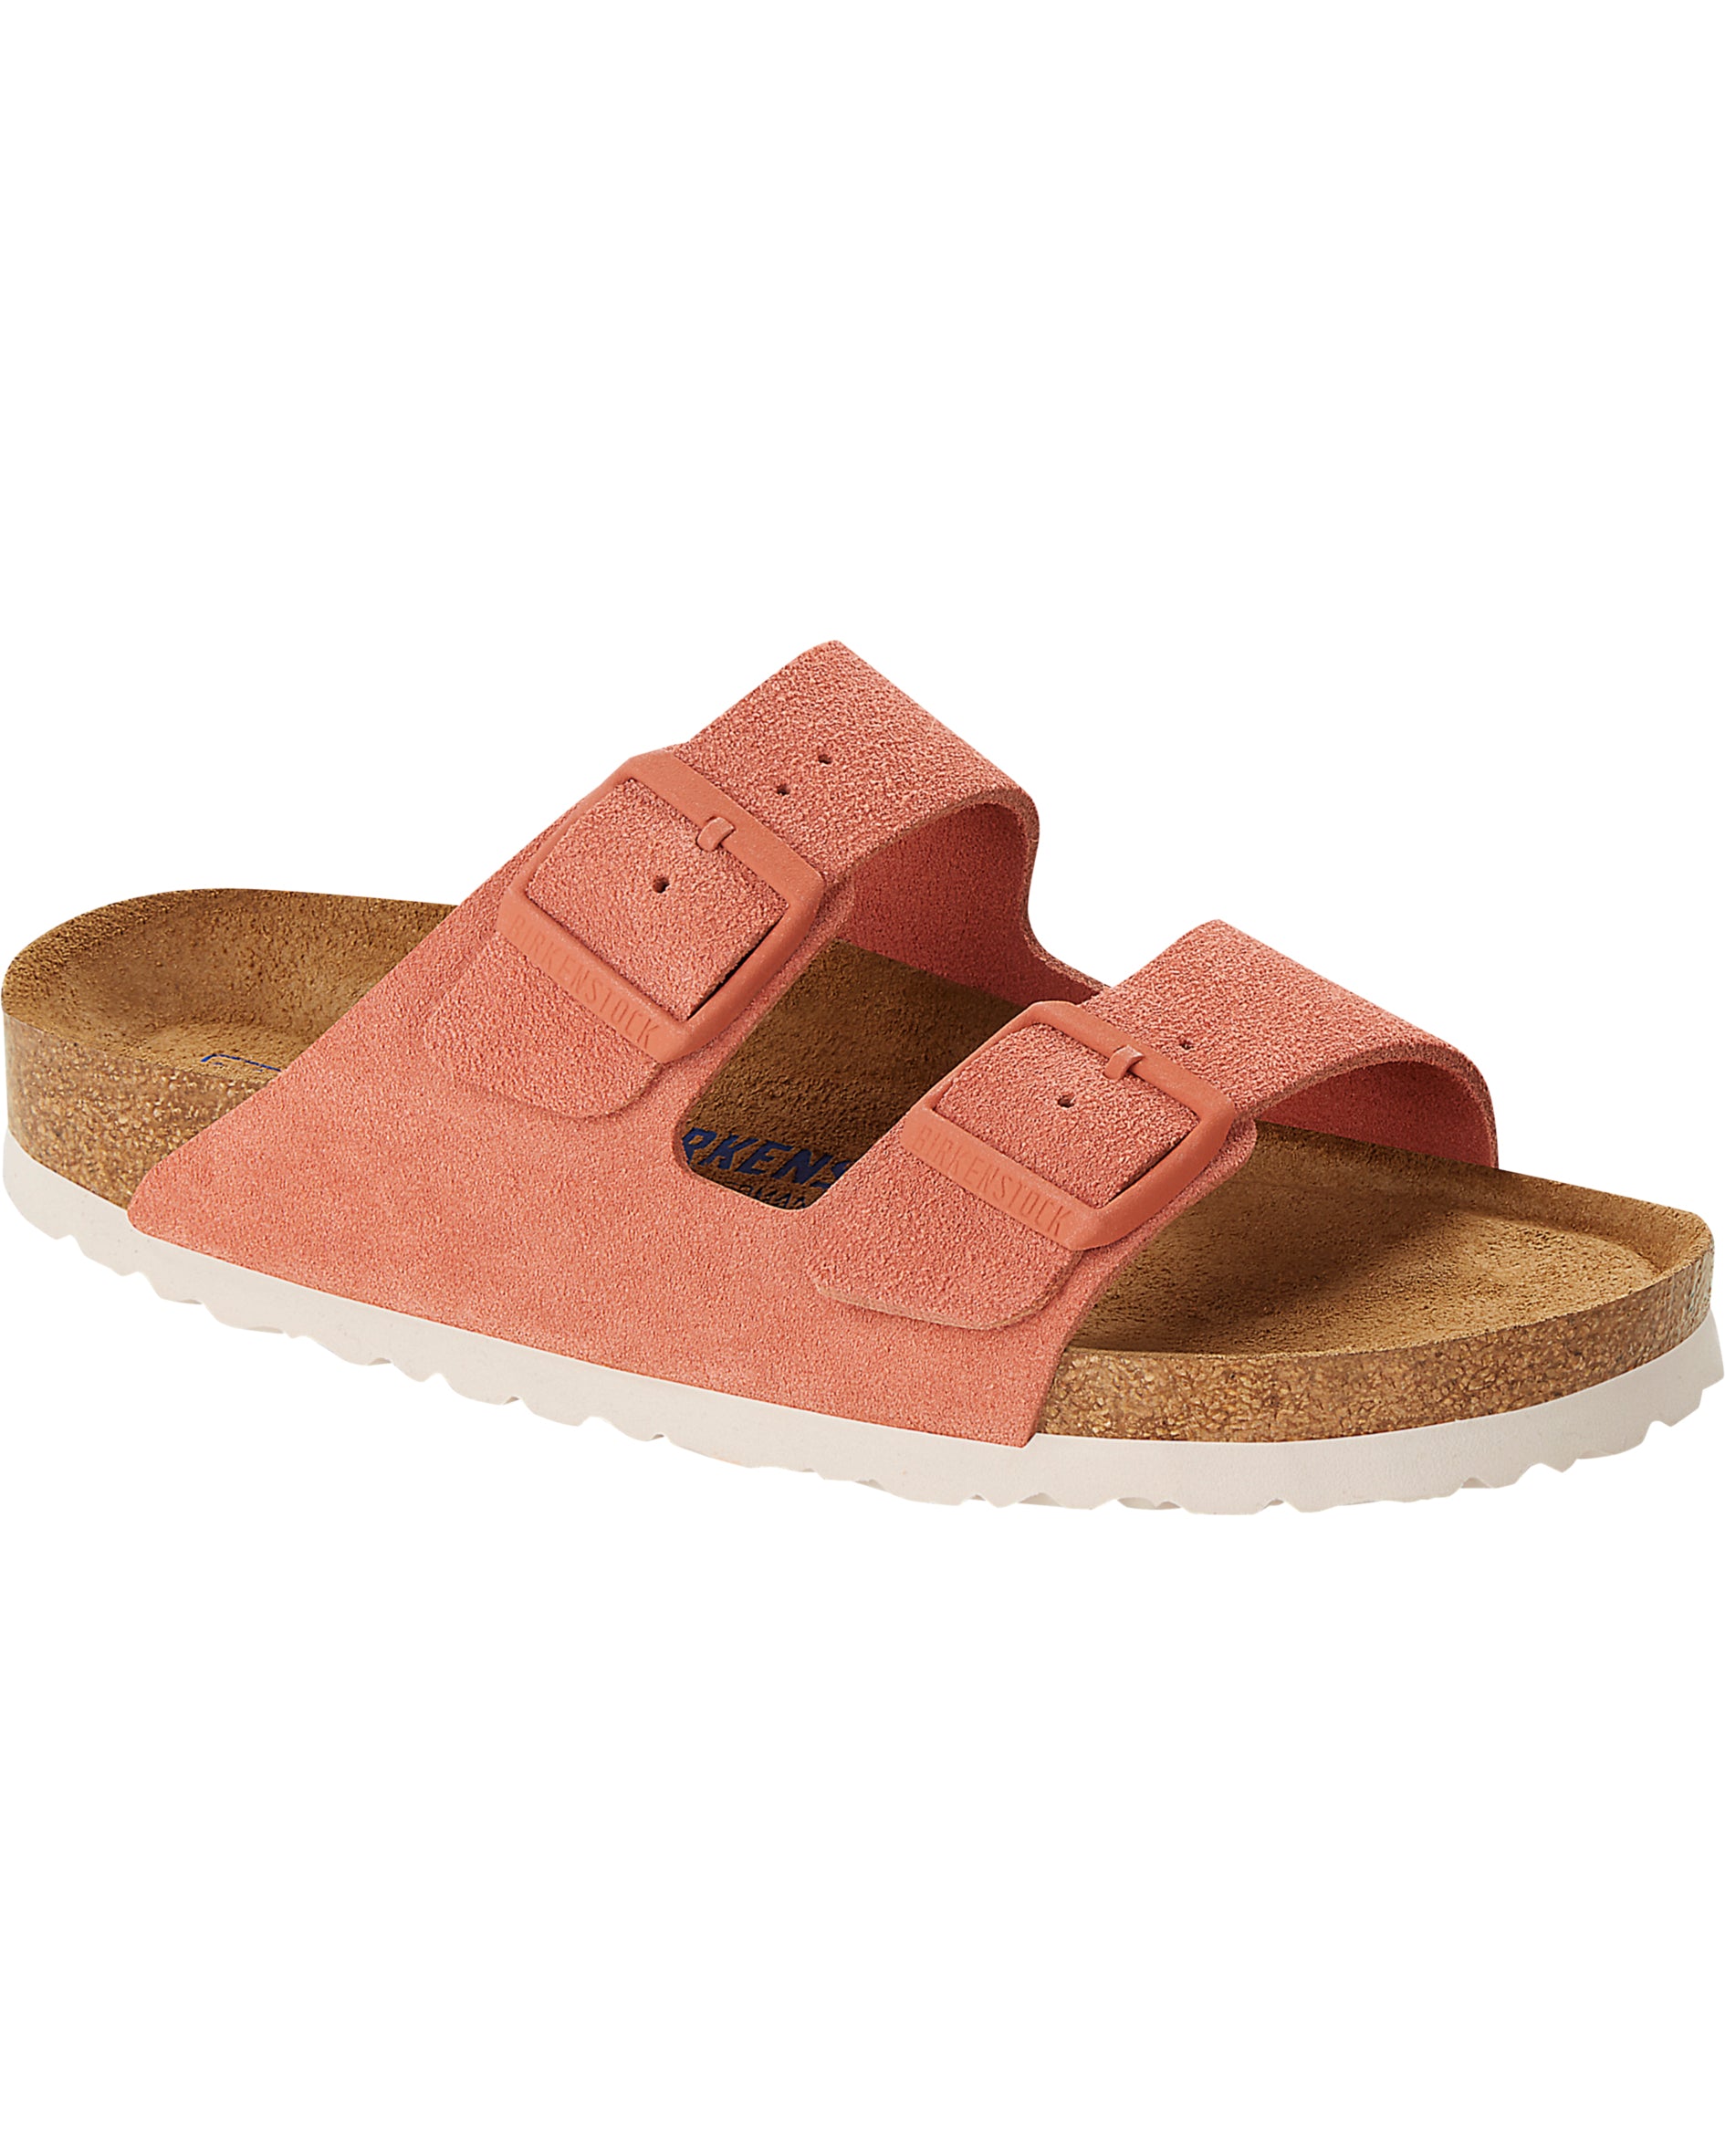 Arizona Soft Footbed Earth Red Suede Leather Sandals